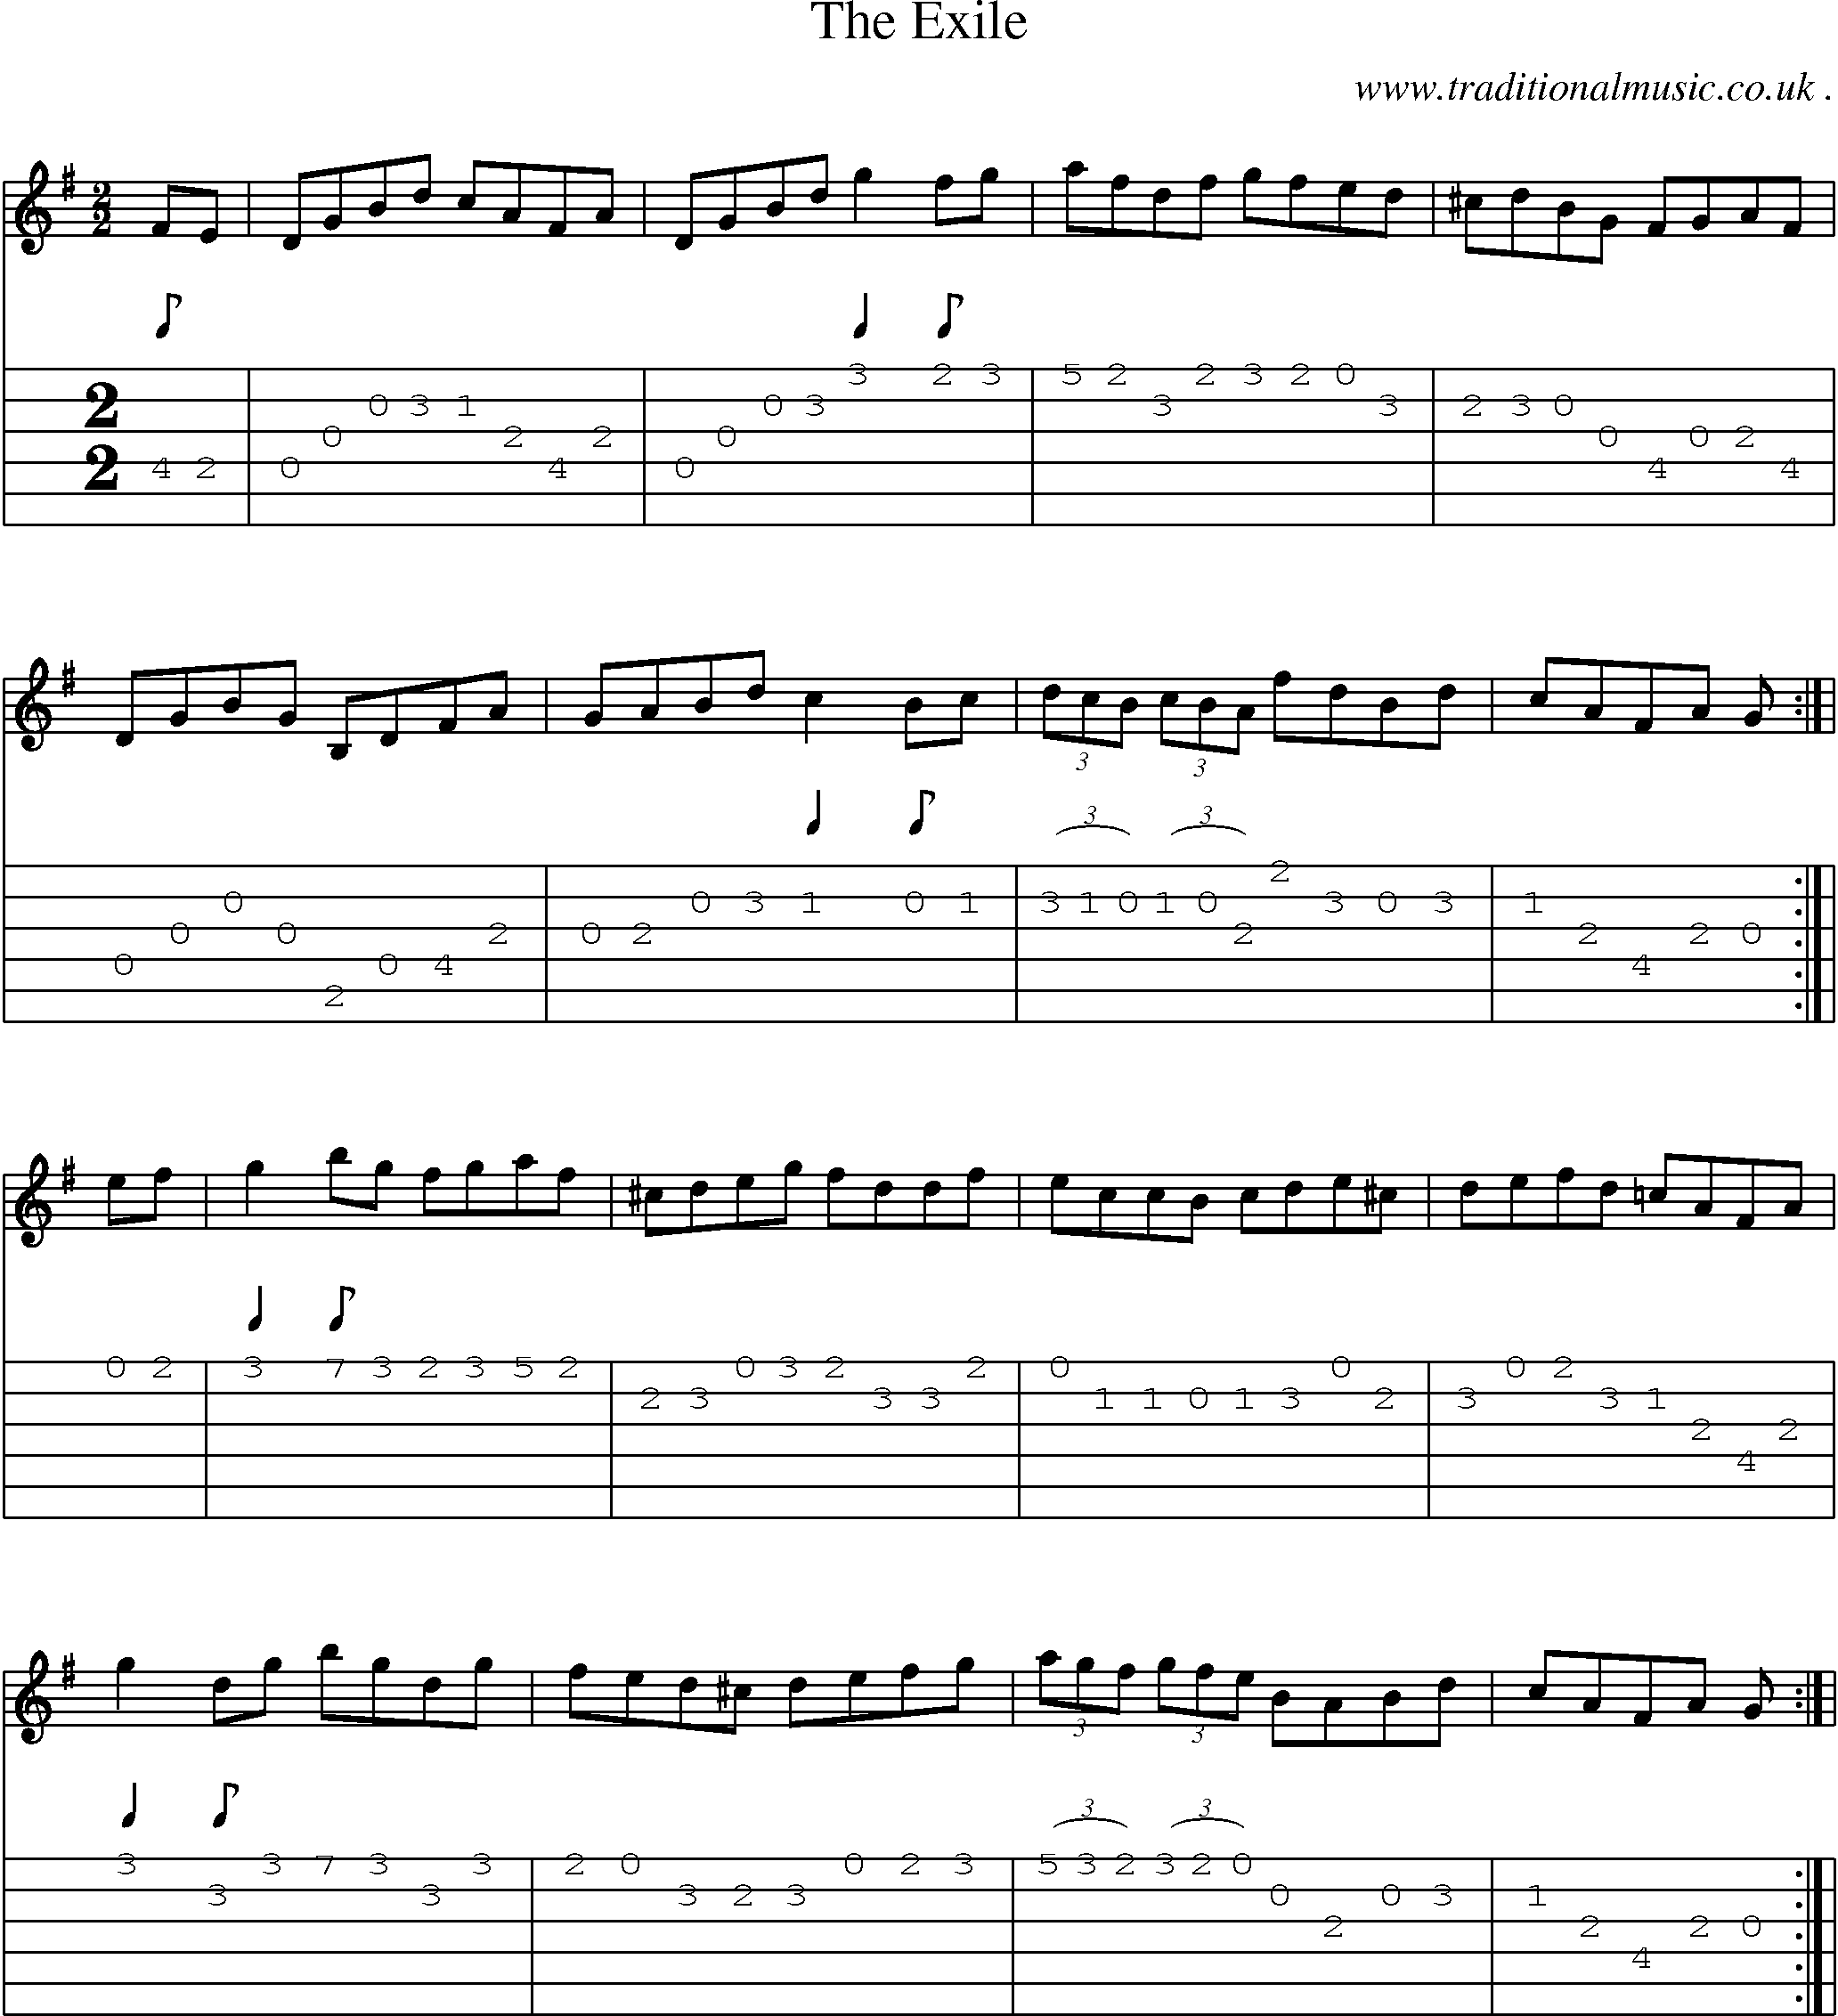 Sheet-Music and Guitar Tabs for The Exile